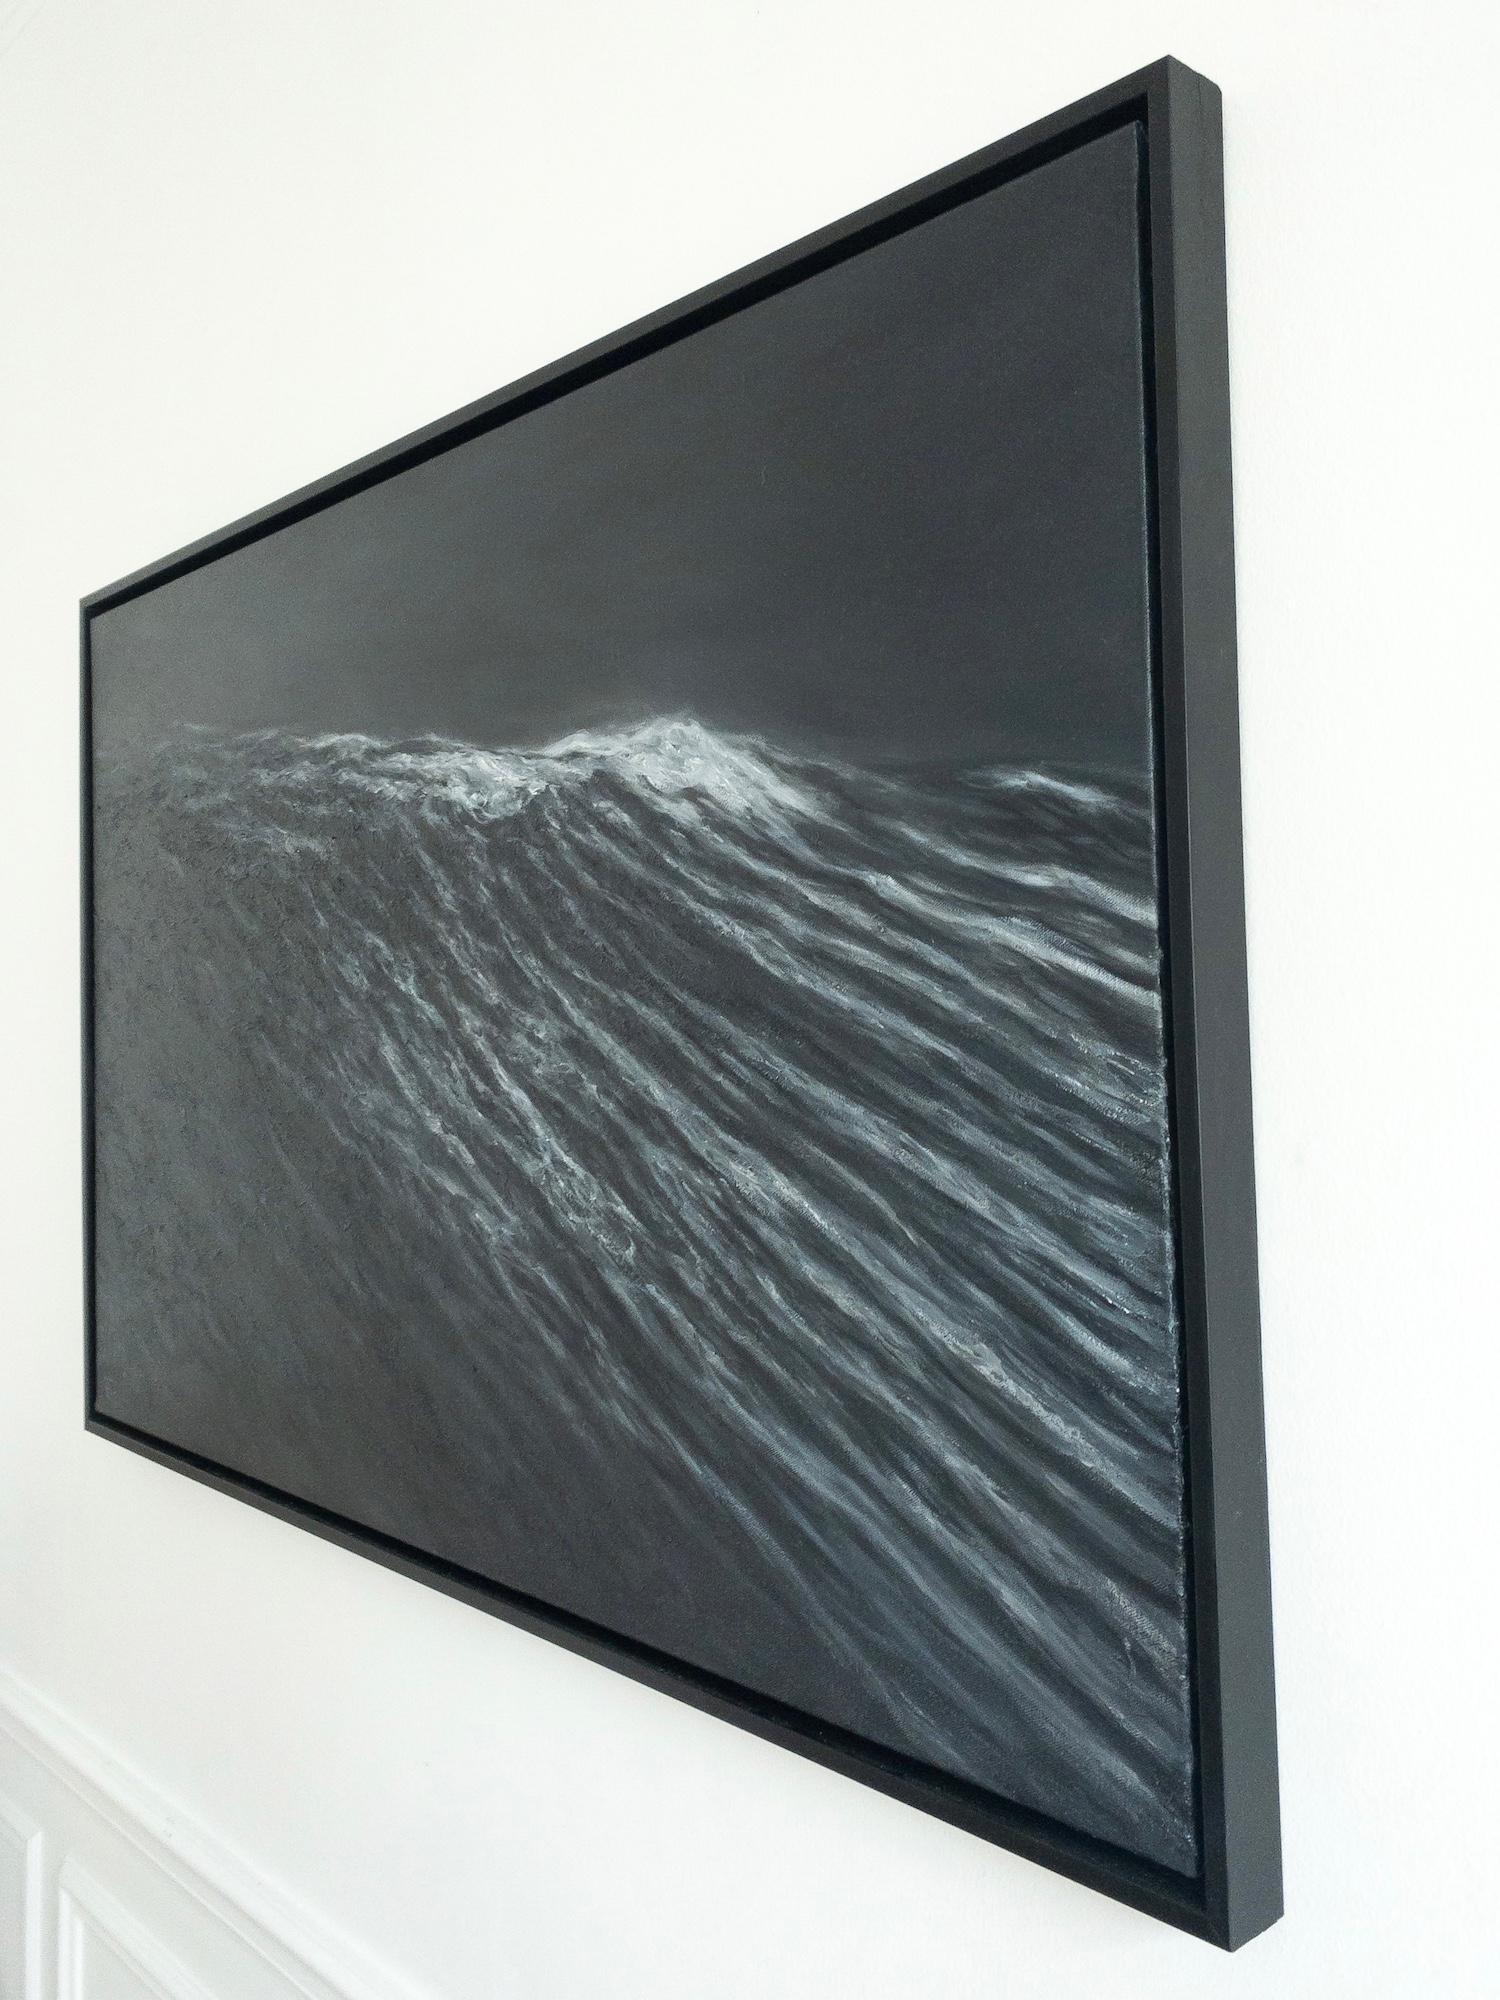 Requiem is a unique oil on canvas painting by contemporary artist Franco Salas Borquez, dimensions are 73 × 116 cm (28.7 × 45.7 in). This painting is sold with a black shadowbox frame, dimensions of the framed artwork are 77 x 120 cm (30.3 x 47.2